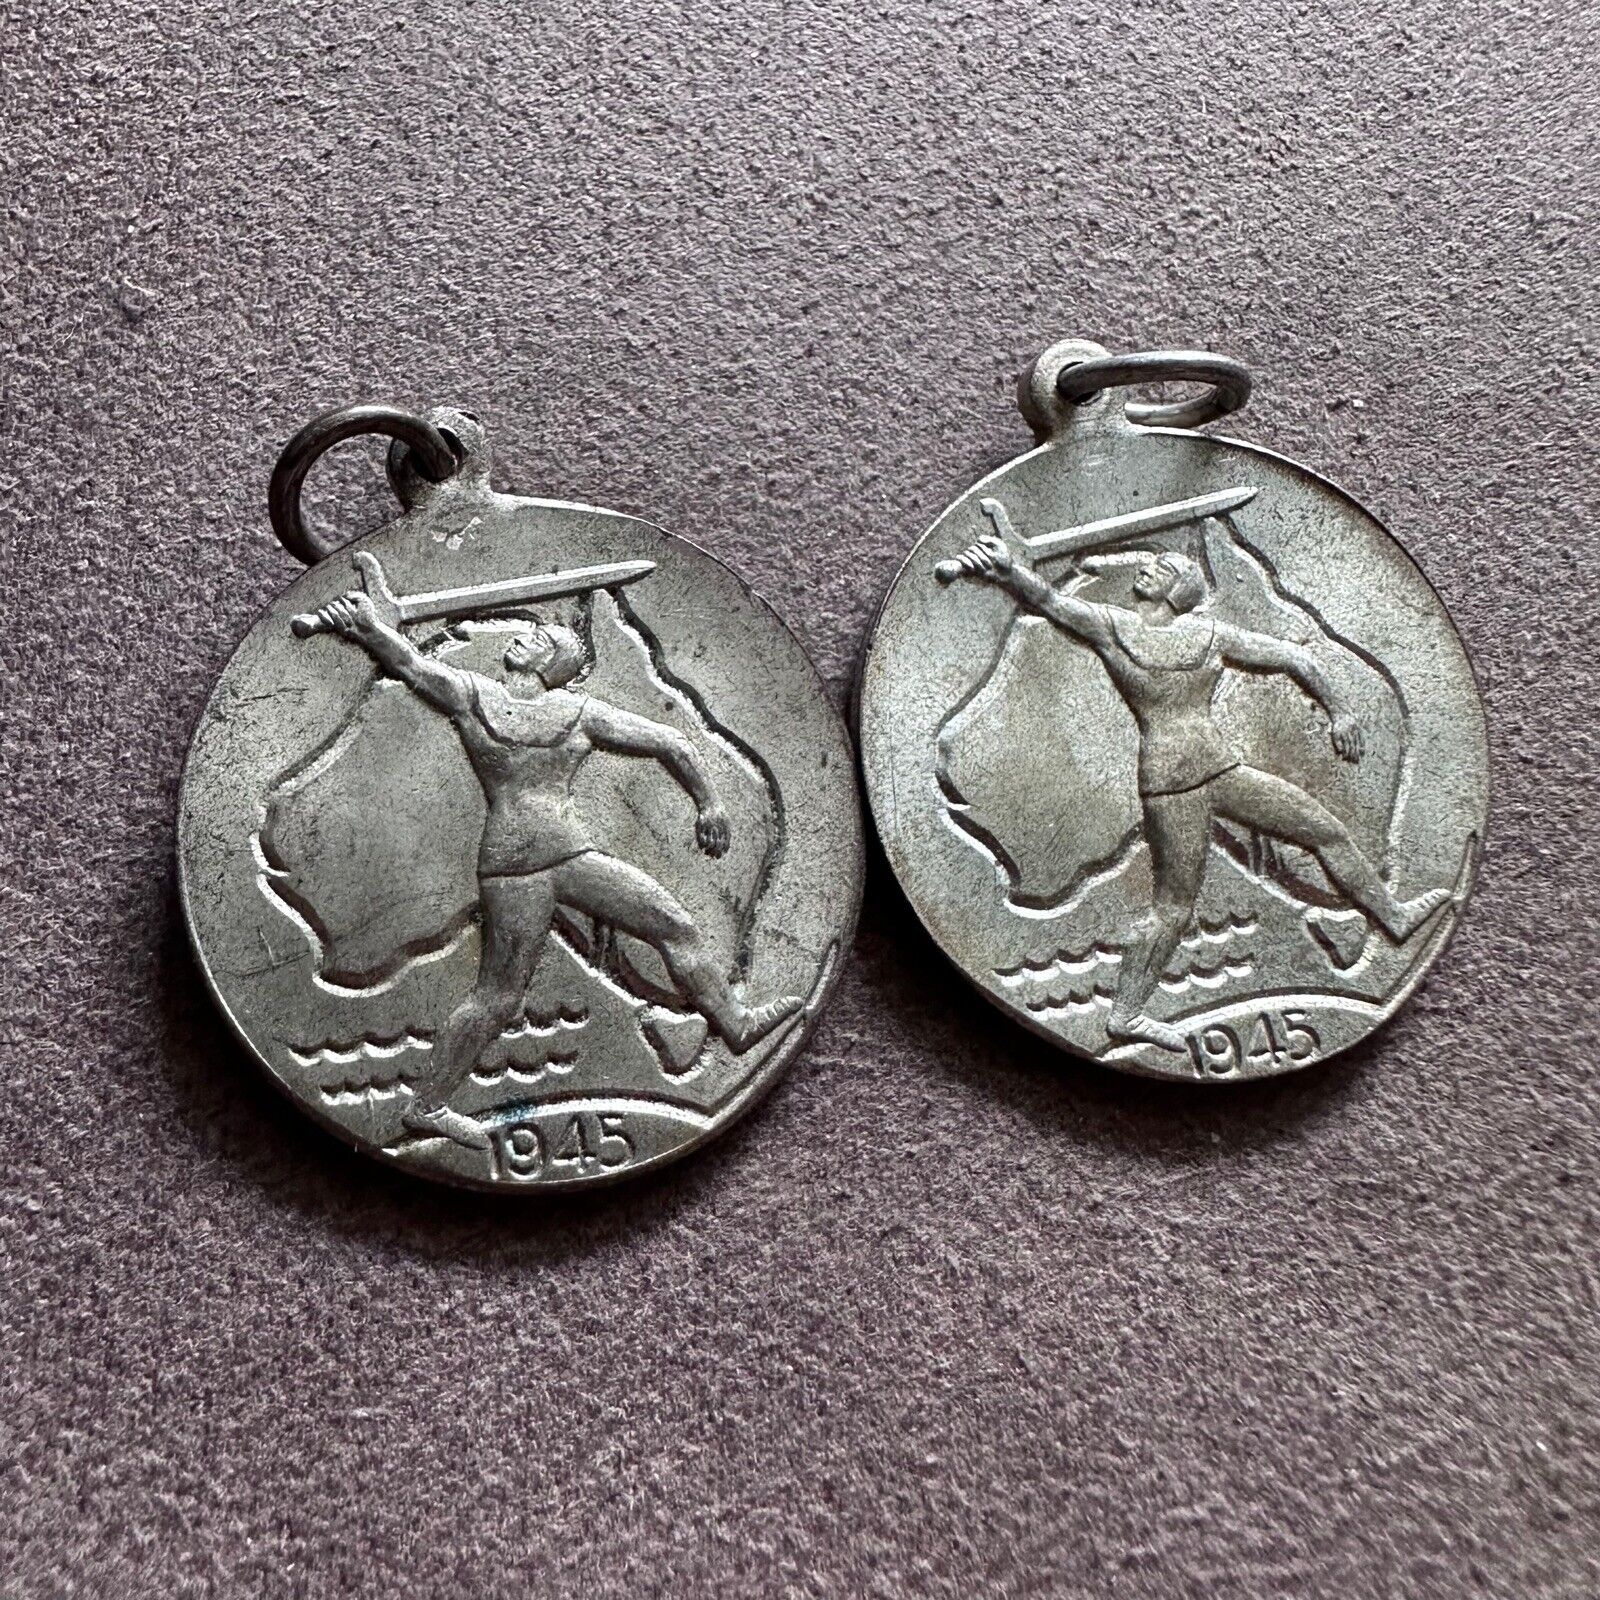 2x VINTAGE 1945 VICTORY AUSTRALIAN COMMEMORATIVE MEDALS MEDALLION WWII STOKES